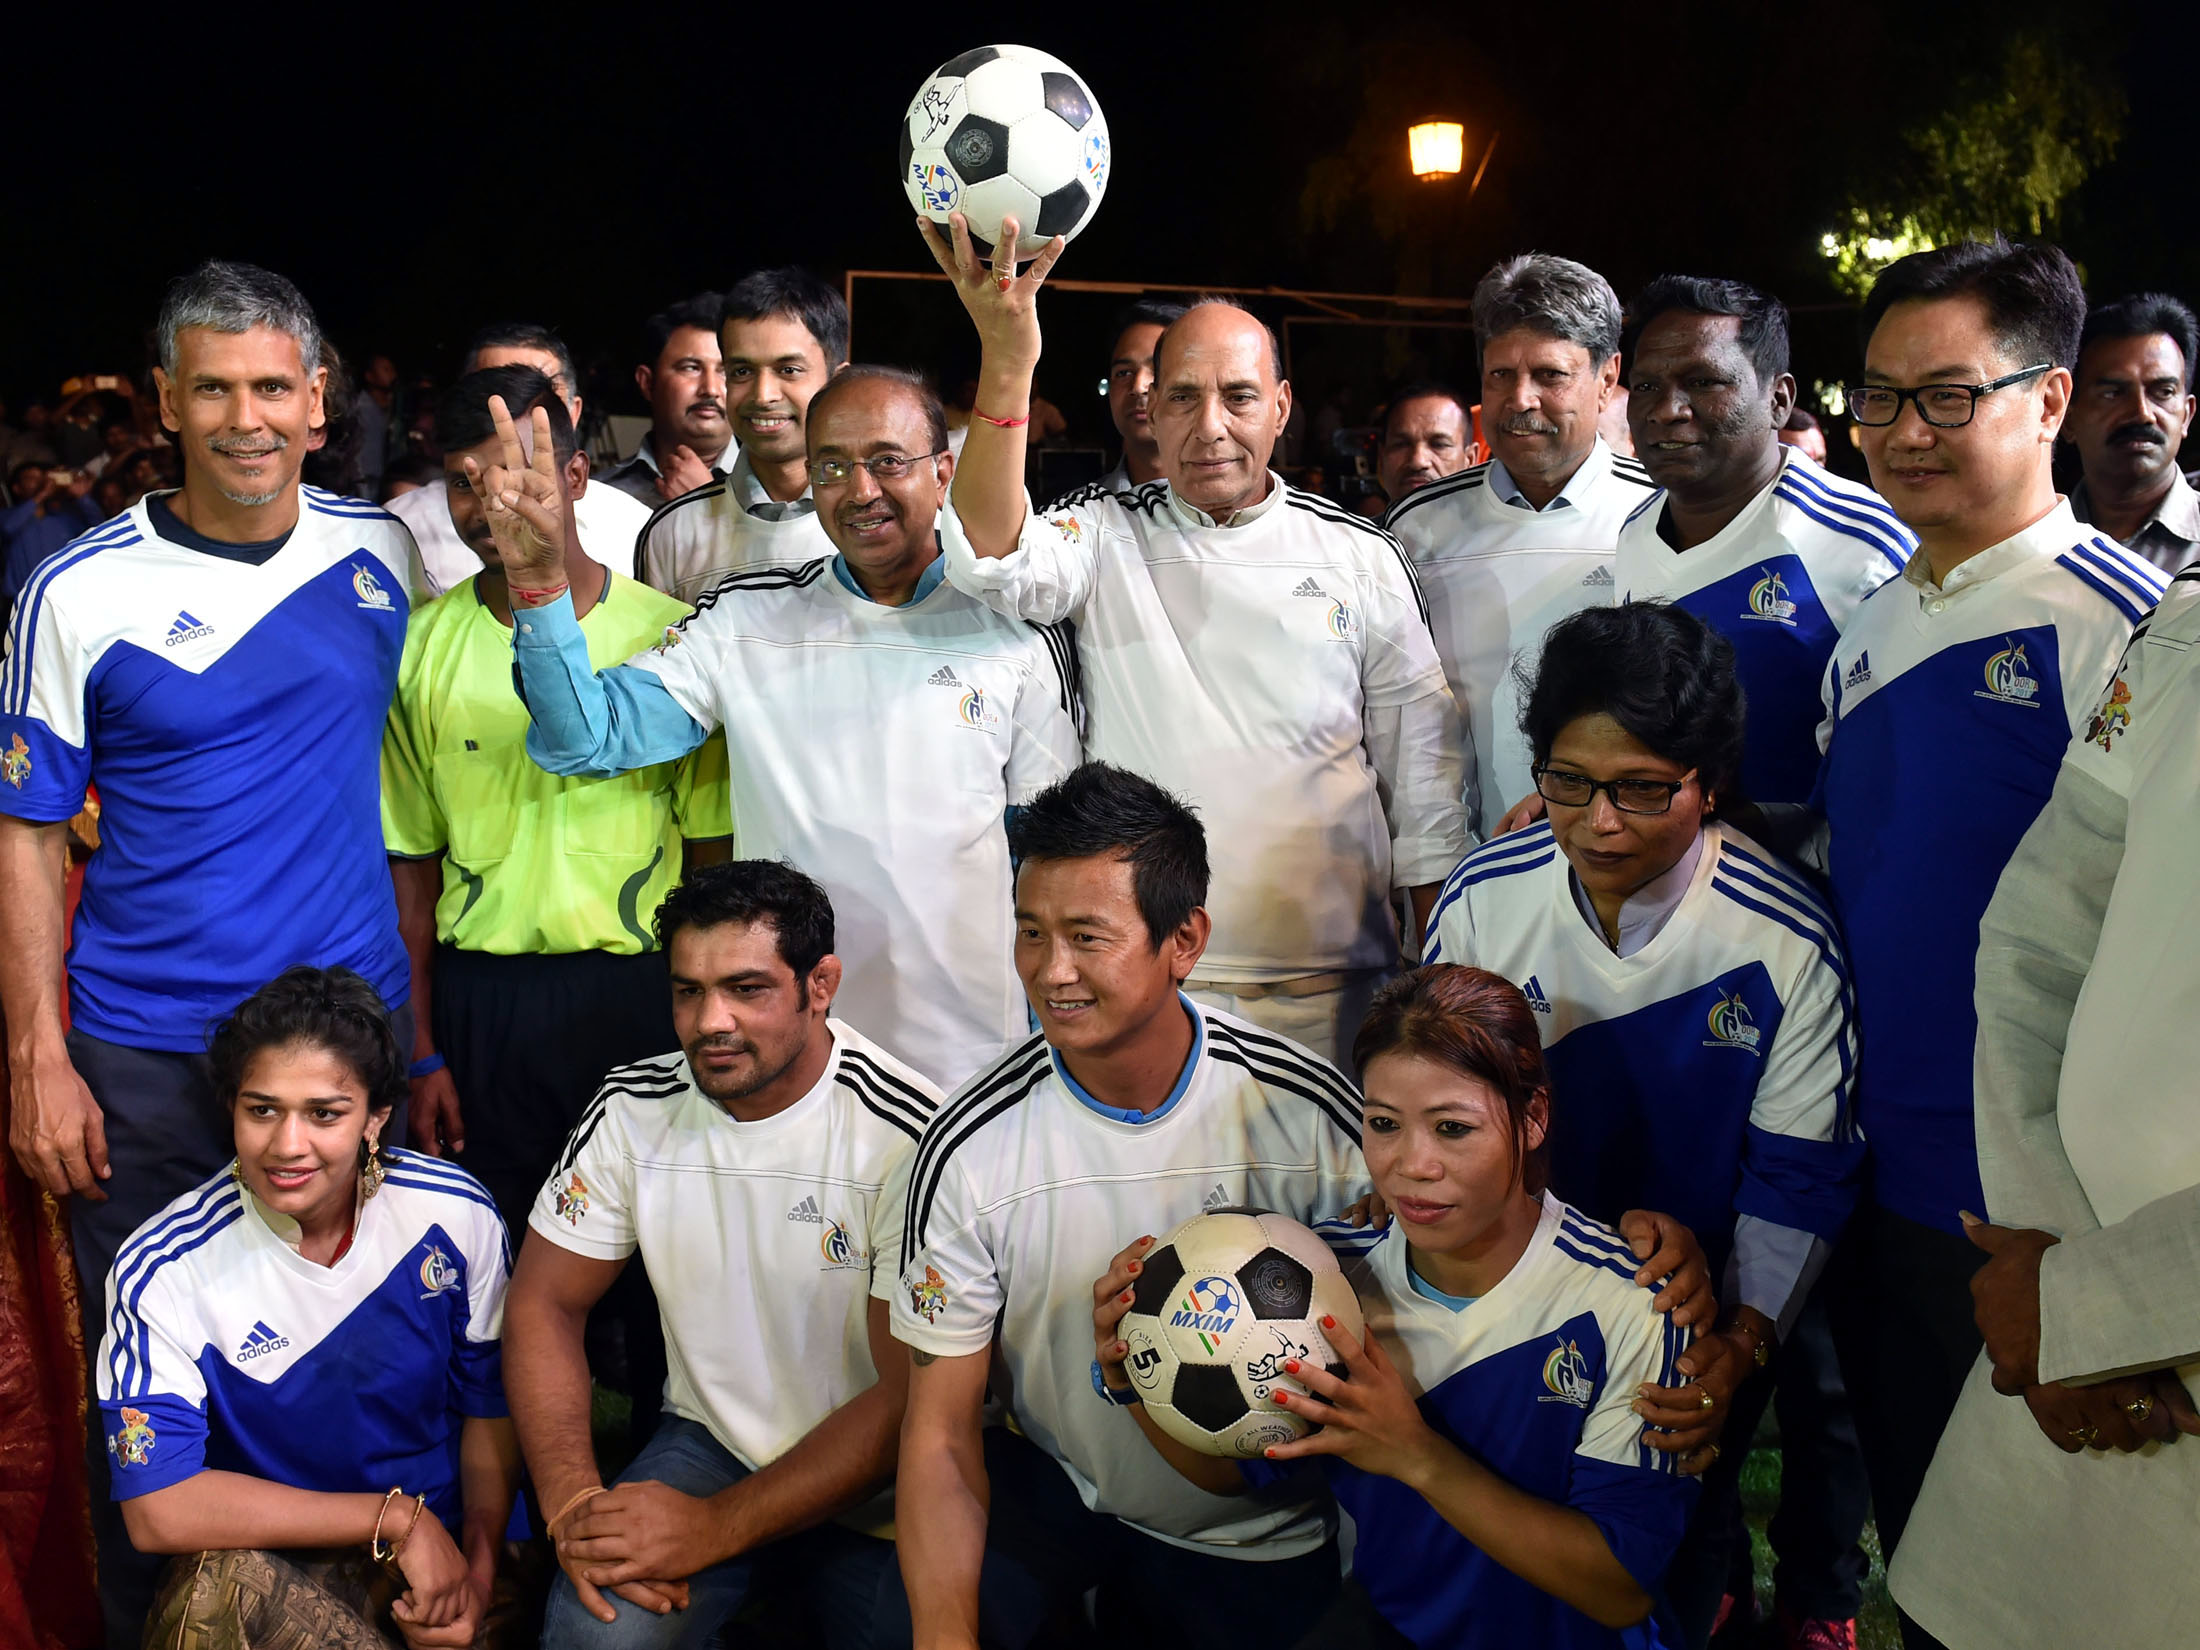 The Union Home Minister, Shri Rajnath Singh at the inauguration of the Curtain Raiser event 'Oorja', a U-19 Football Talent Hunt Tournament , organised by the Central Armed Police Forces and Central Police Organisation, in New Delhi on April 22, 2017.  The Minister of State for Youth Affairs and Sports (I/C), Water Resources, River Development and Ganga Rejuvenation, Shri Vijay Goel, the Minister of State for Home Affairs, Shri Kiren Rijiju and other dignitaries are also seen.